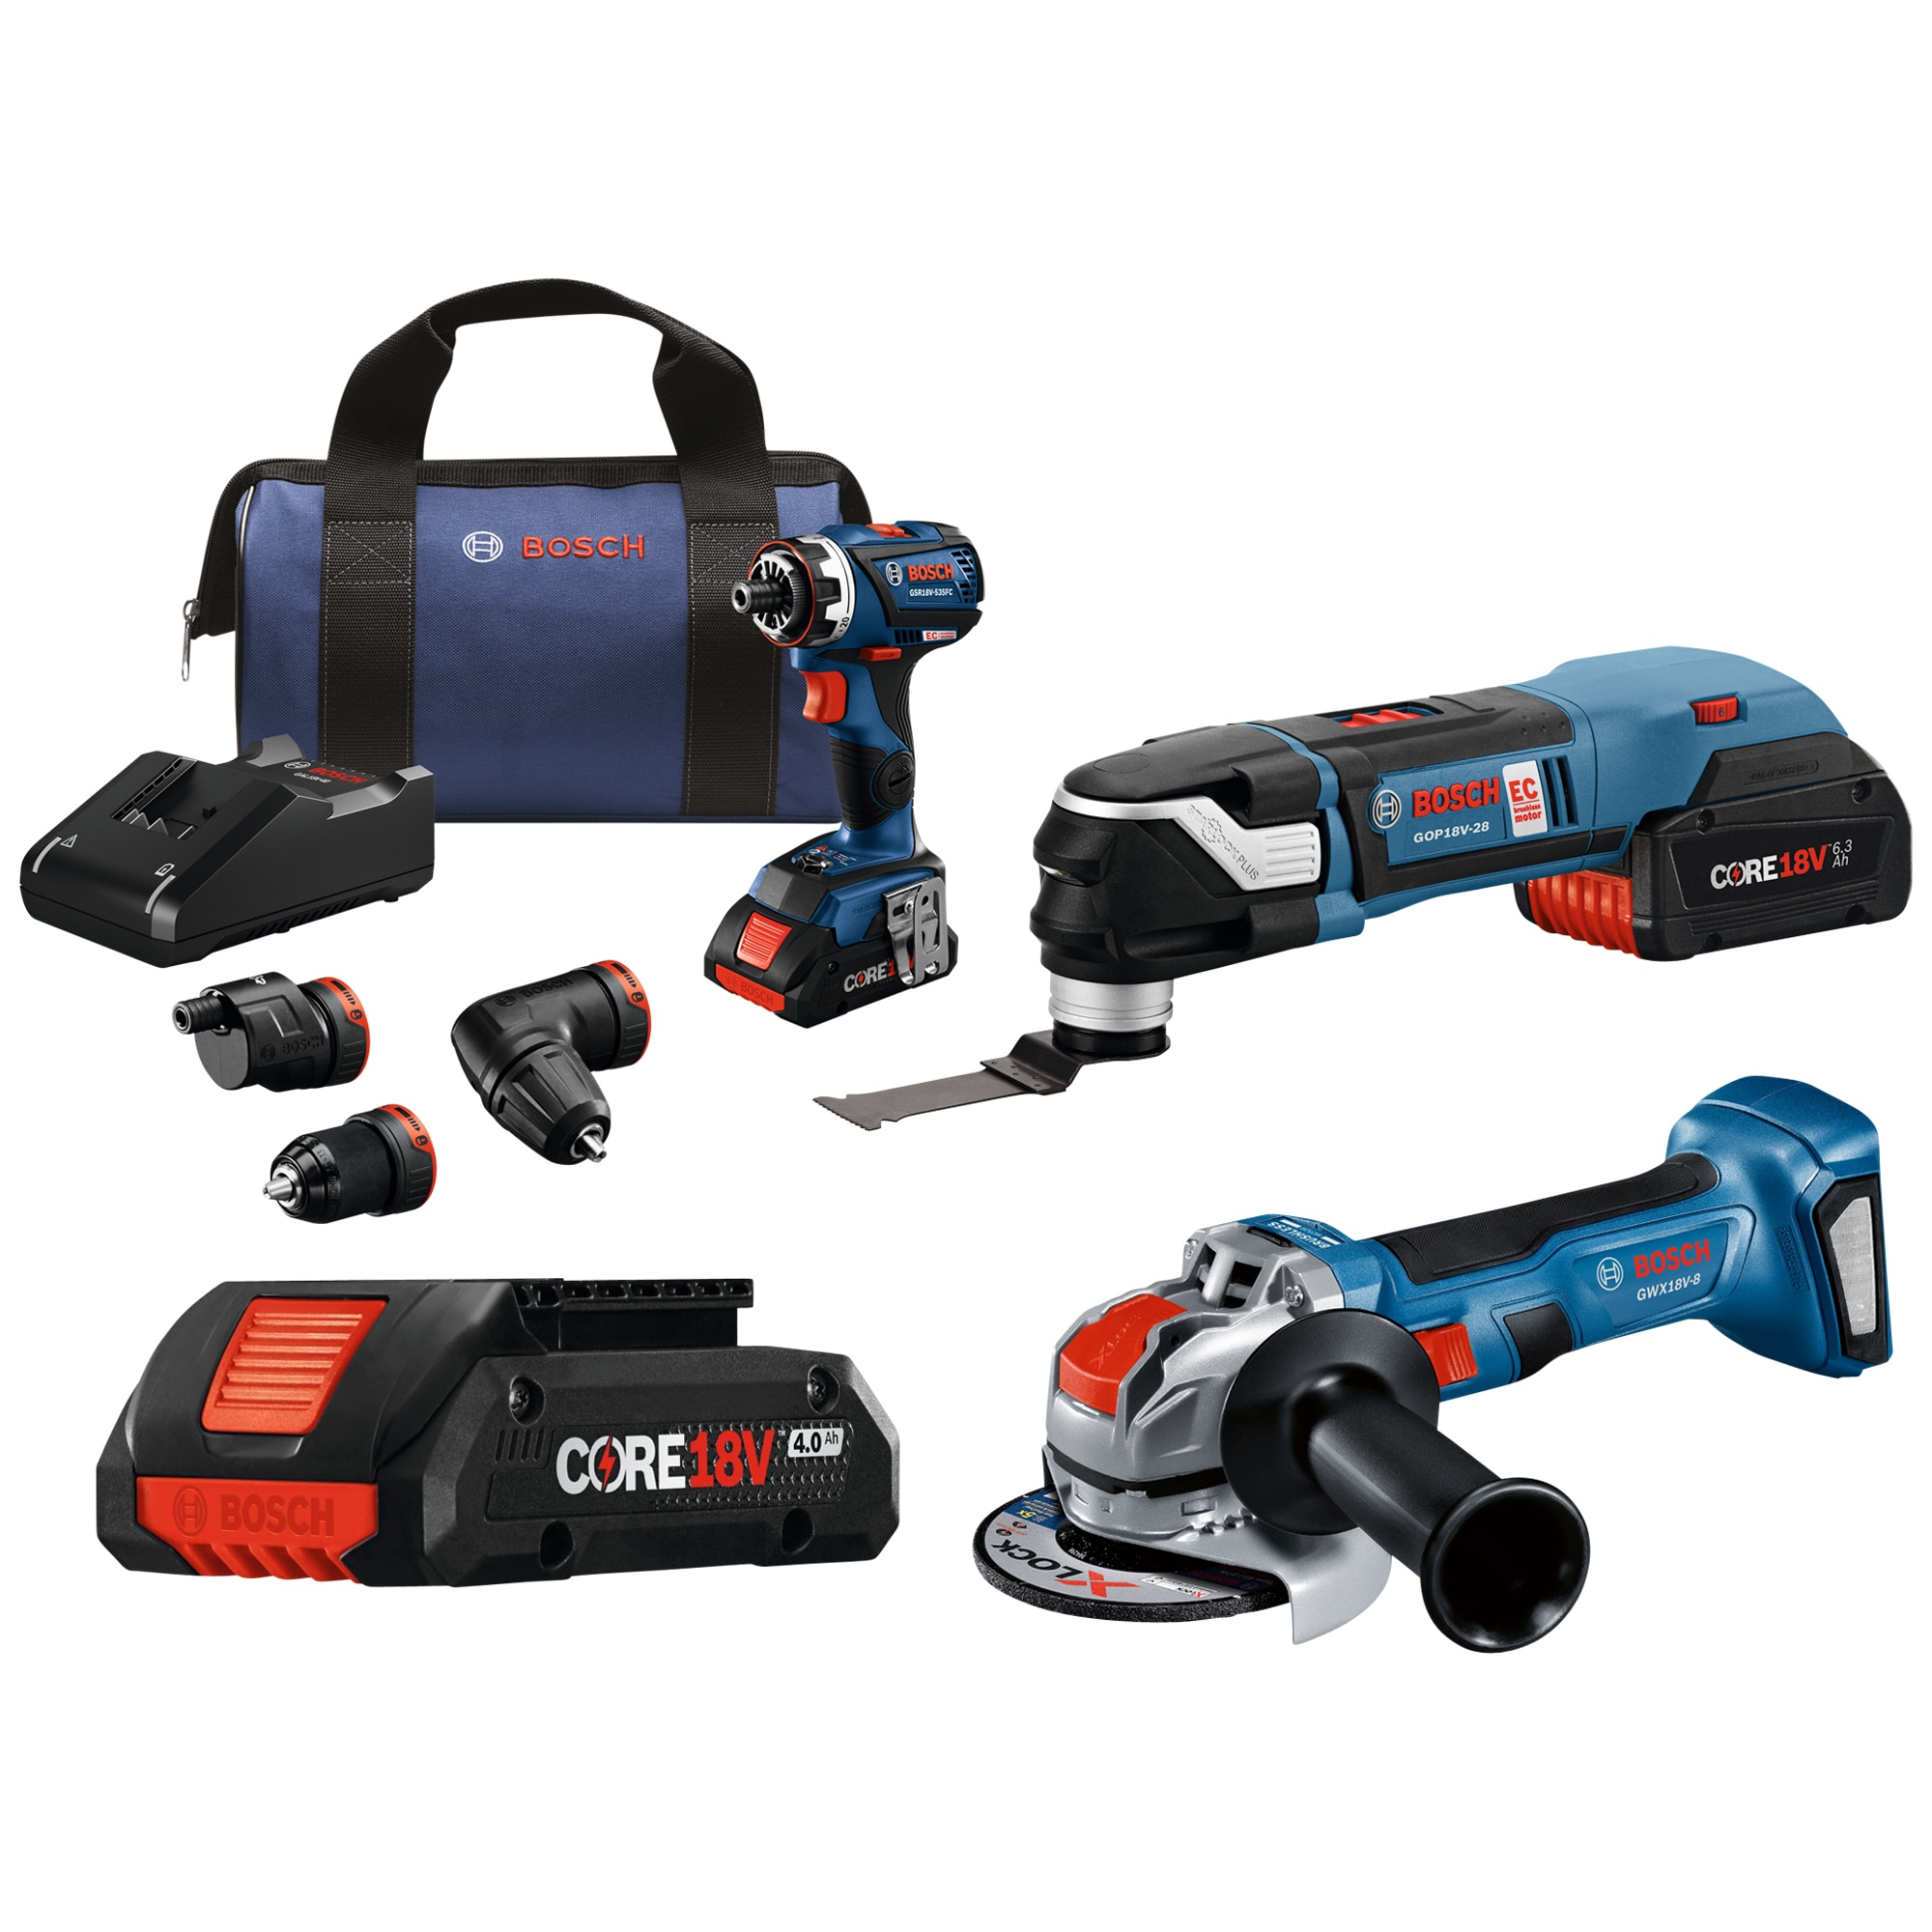 Bosch StarlockPlus 18-volt in Oscillating Variable Multi-Tool Tool department Cordless Oscillating Speed Brushless at the Kits